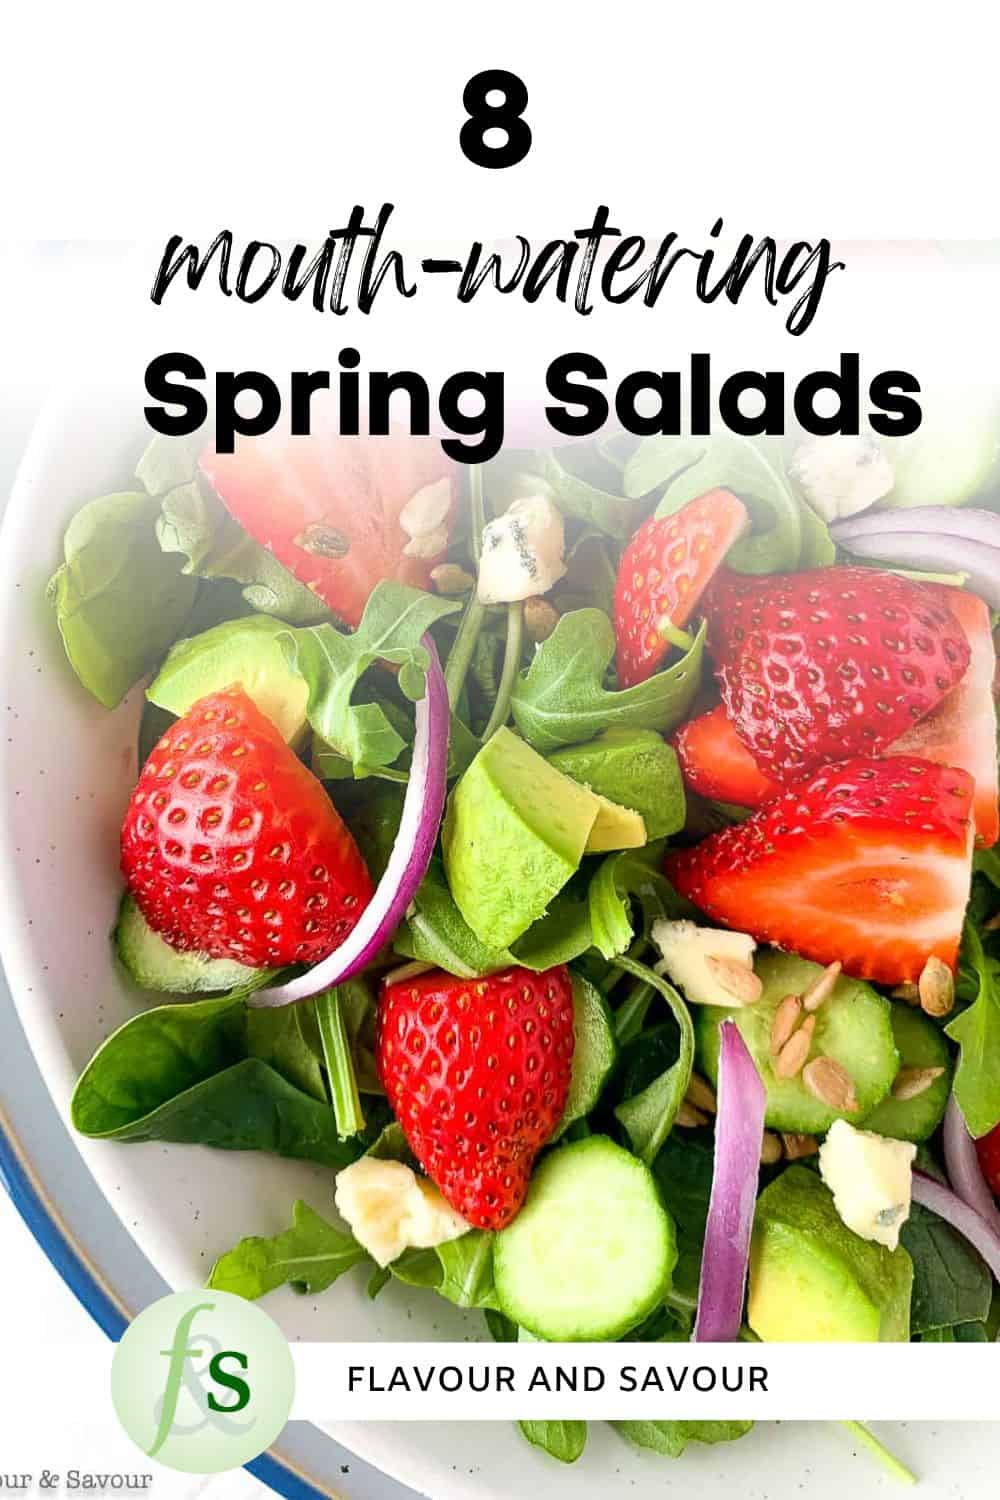 Image with text overlay for 8 mouth-watering Spring salads.